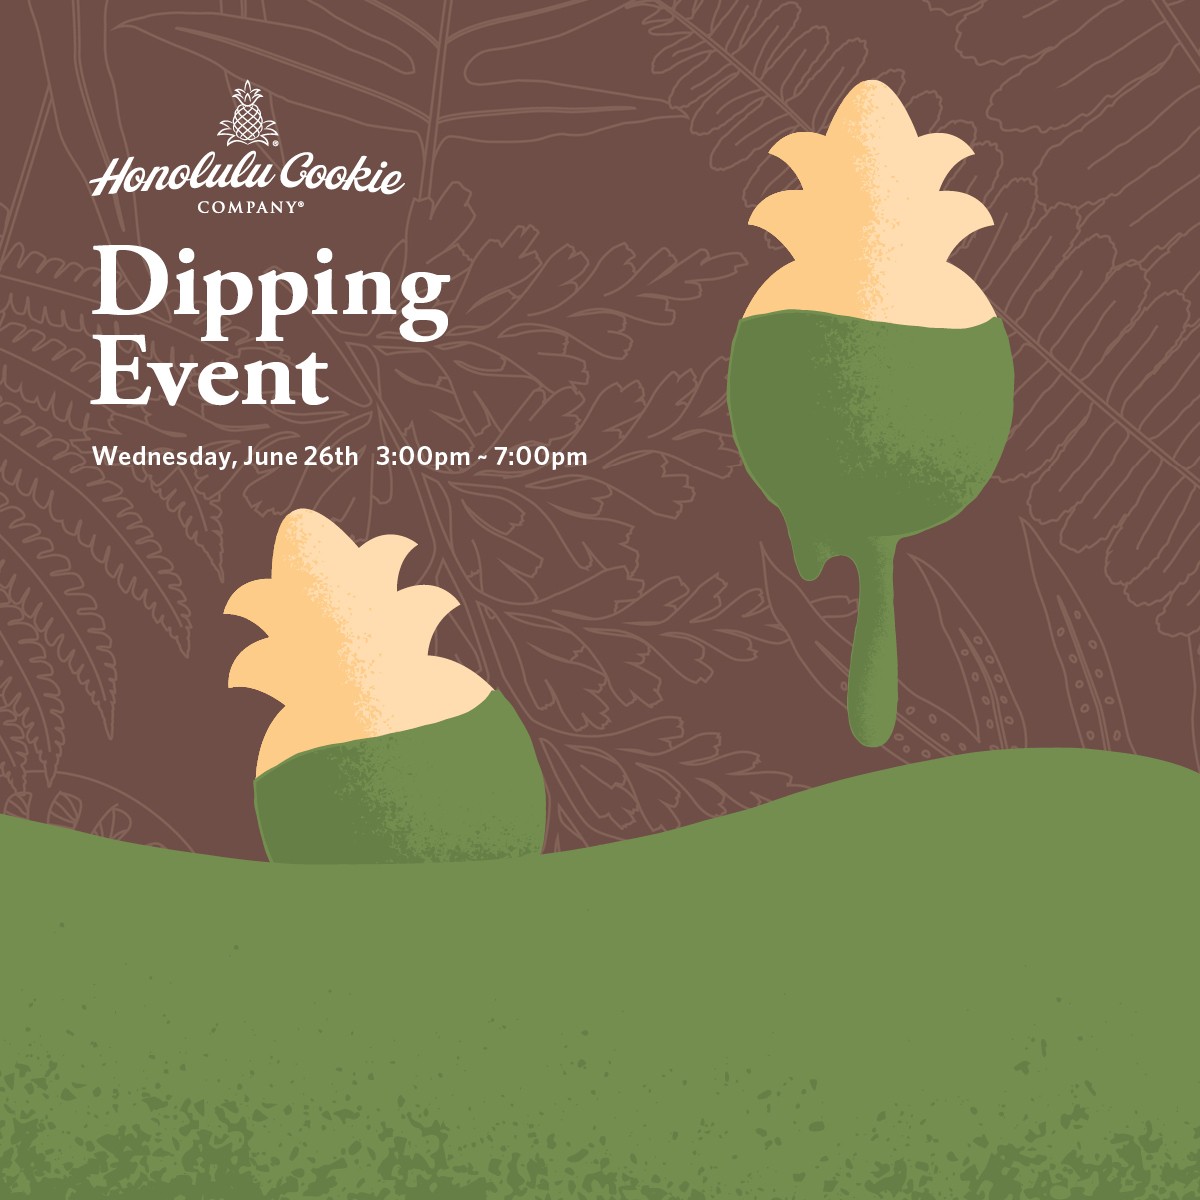 Honolulu Cookie Company Dipping Event